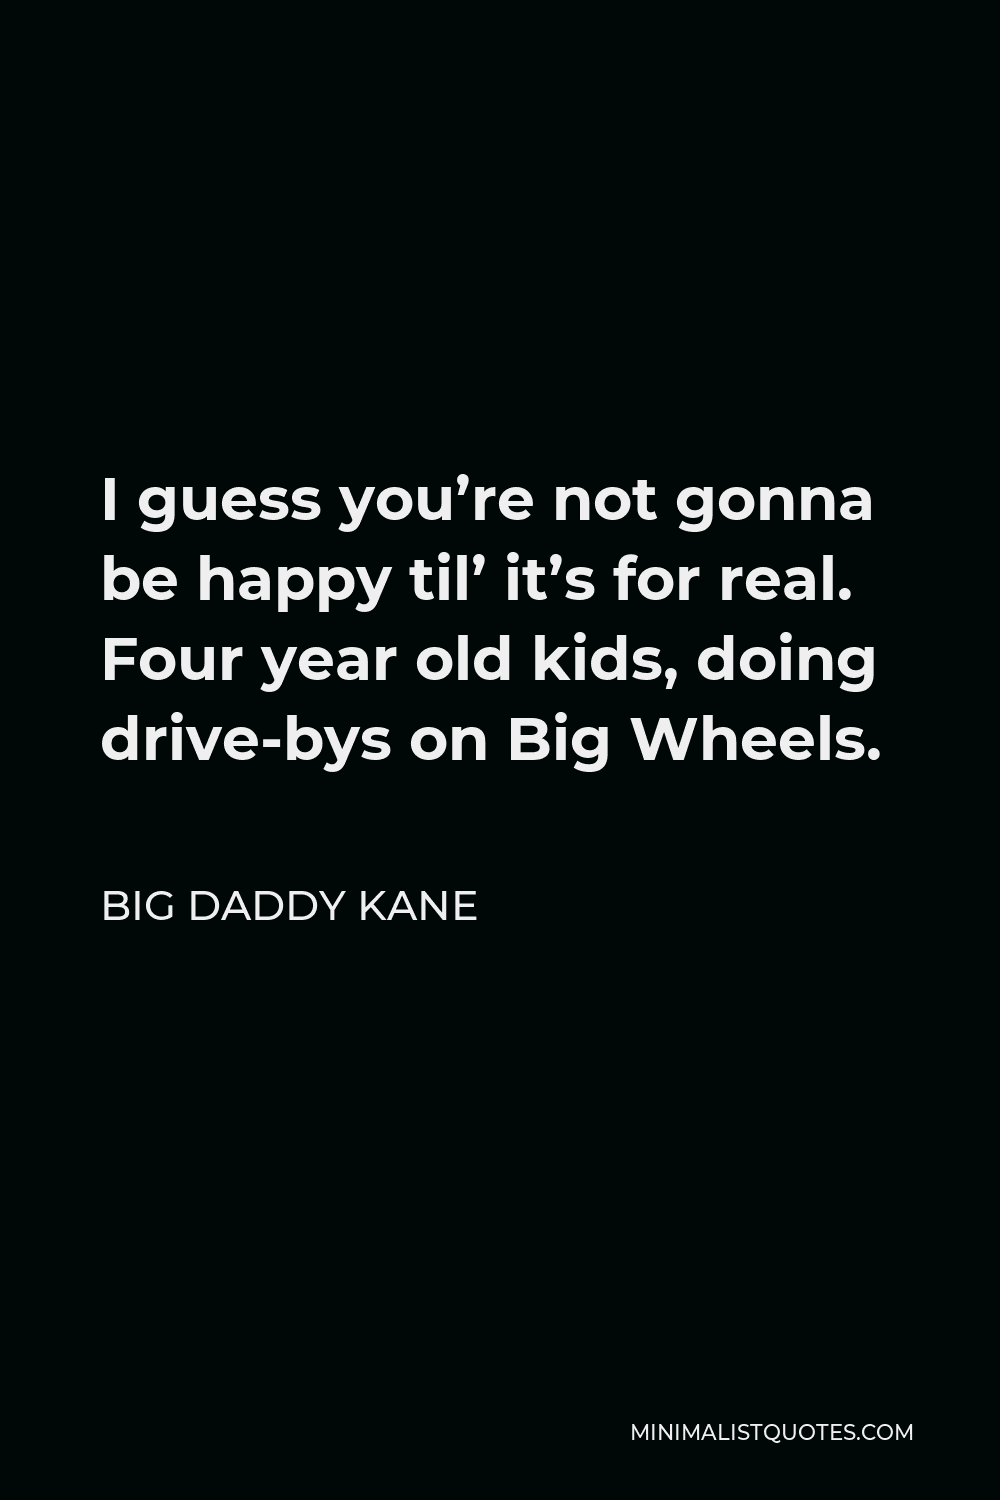 Big Daddy Kane Quote - I guess you’re not gonna be happy til’ it’s for real. Four year old kids, doing drive-bys on Big Wheels.